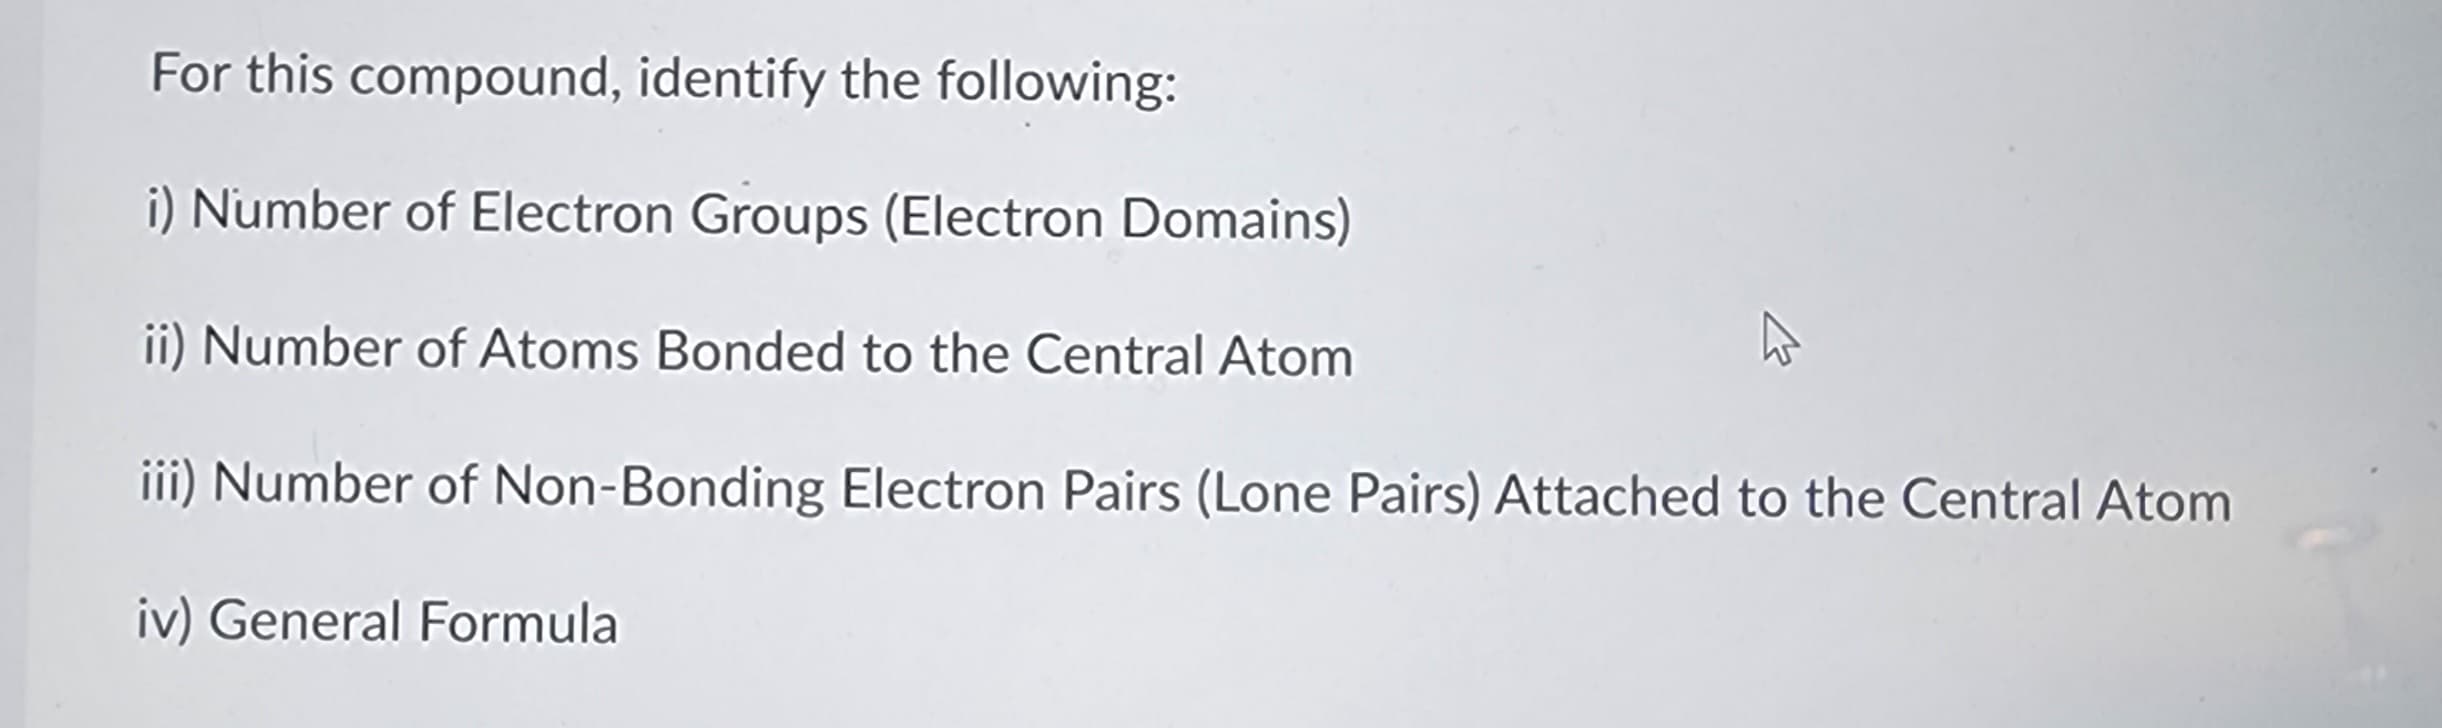 For this compound, identify the following:
i) Number of Electron Groups (Electron Domains)
ii) Number of Atoms Bonded to the Central Atom
iii) Number of Non-Bonding Electron Pairs (Lone Pairs) Attached to the Central Atom
iv) General Formula